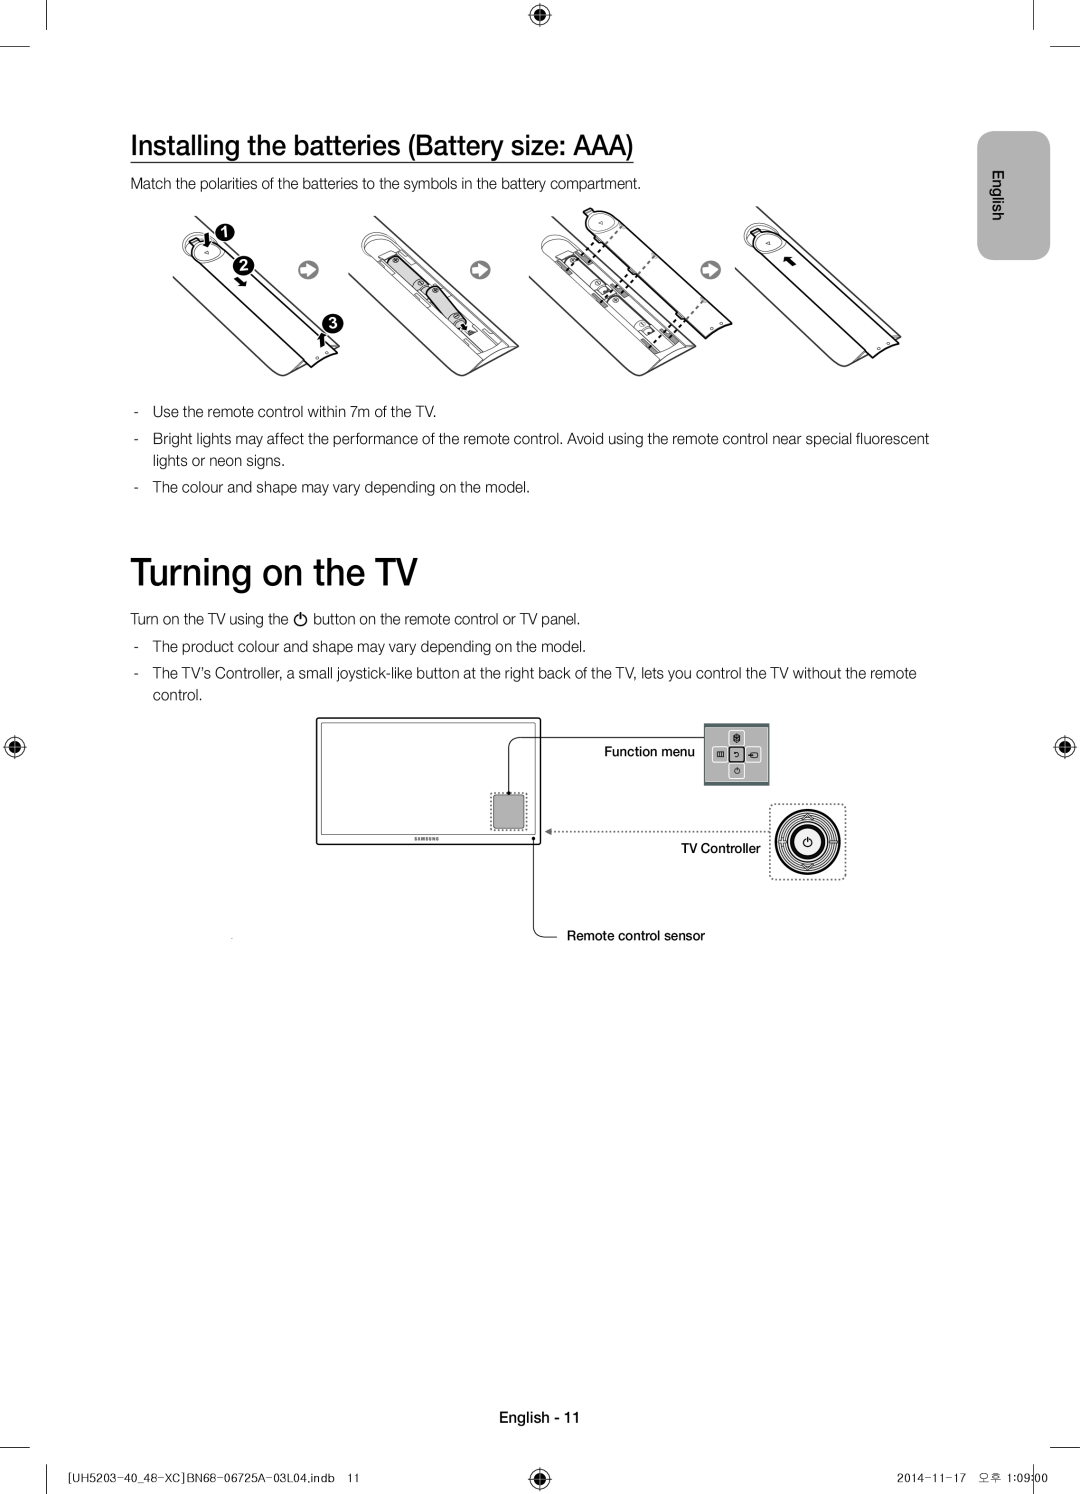 Samsung UE48H5203AWXXC, UE40H5203AWXXC manual Turning on the TV, Installing the batteries Battery size AAA 